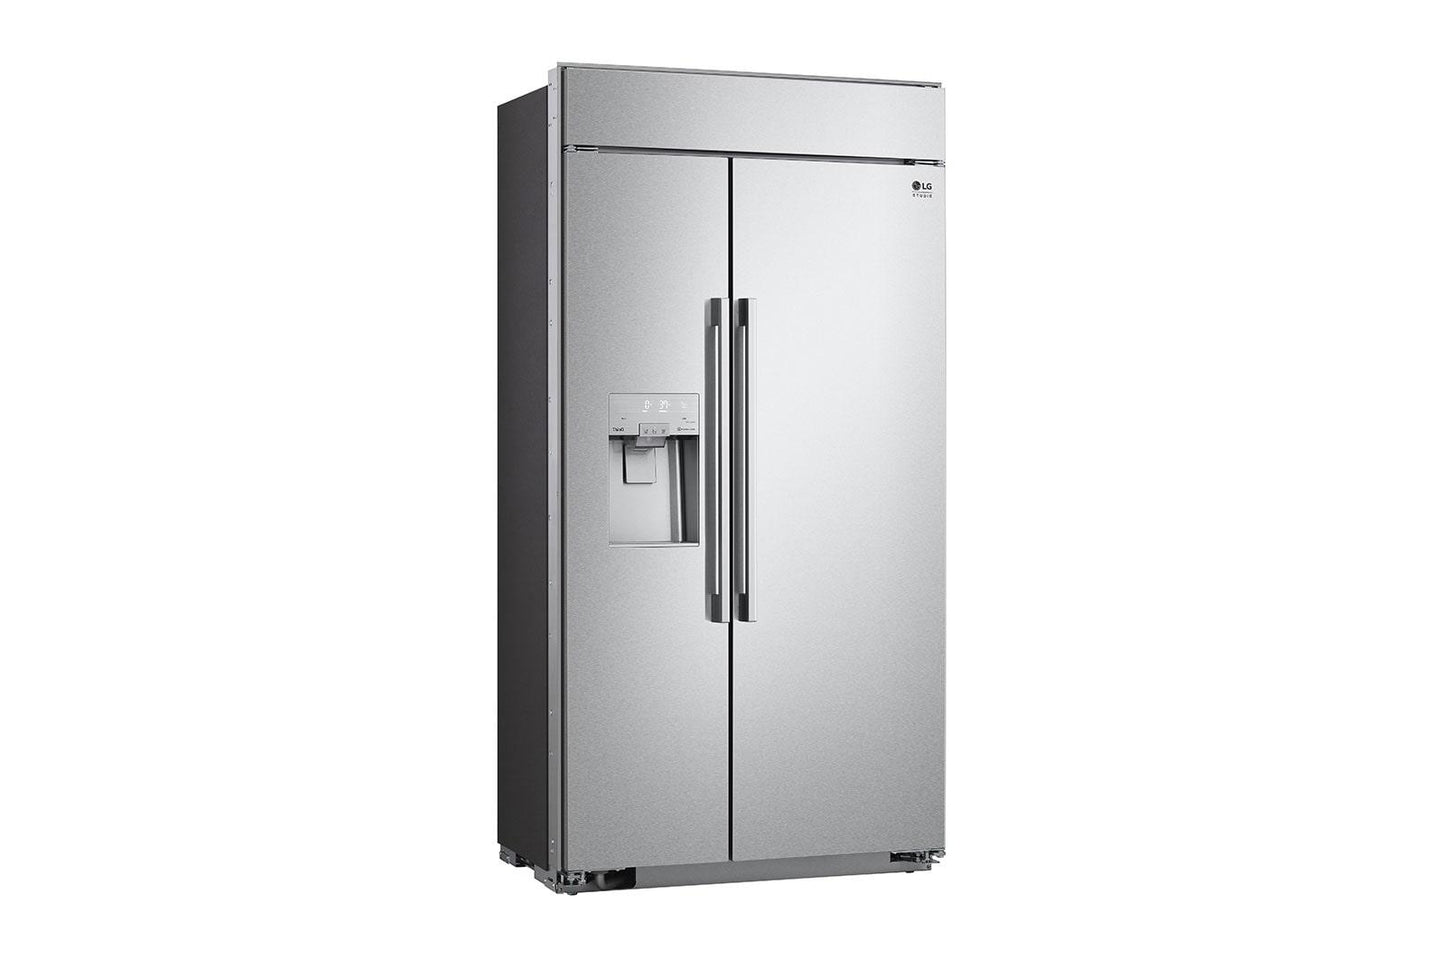 Lg SRSXB2622S Lg Studio 26 Cu. Ft. Smart Side-By-Side Built-In Refrigerator With Ice & Water Dispenser